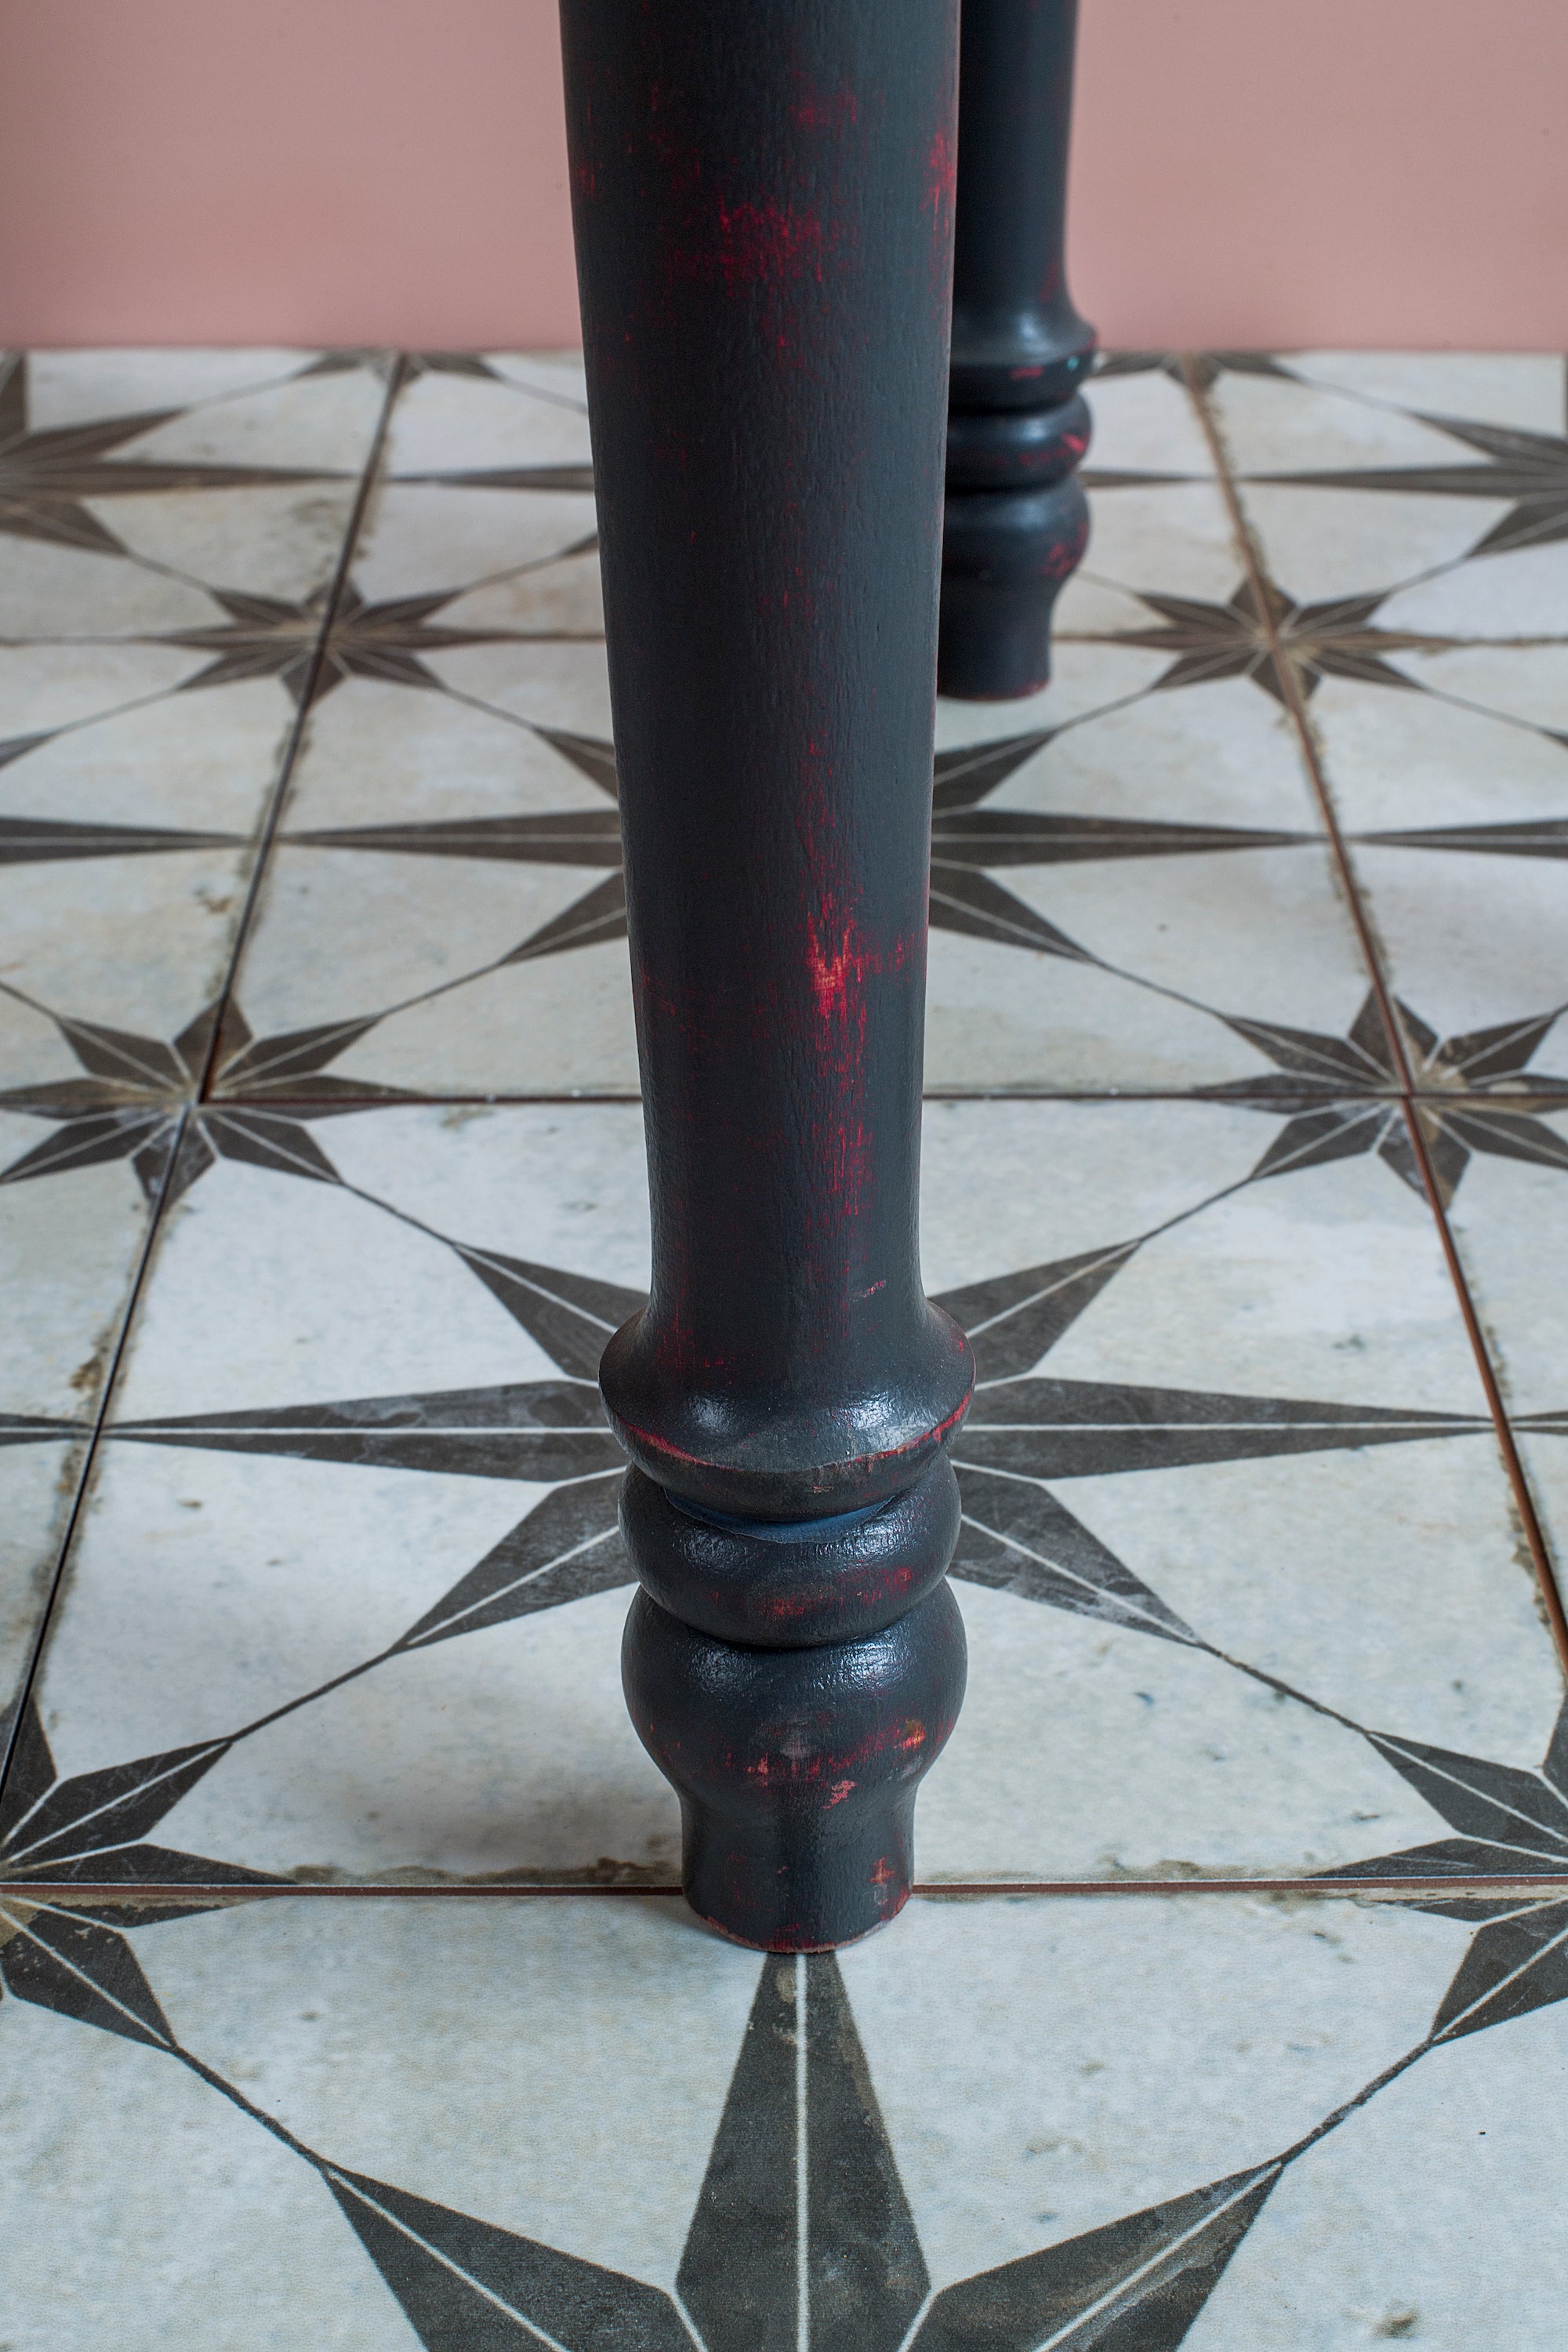 The Malabar End Table